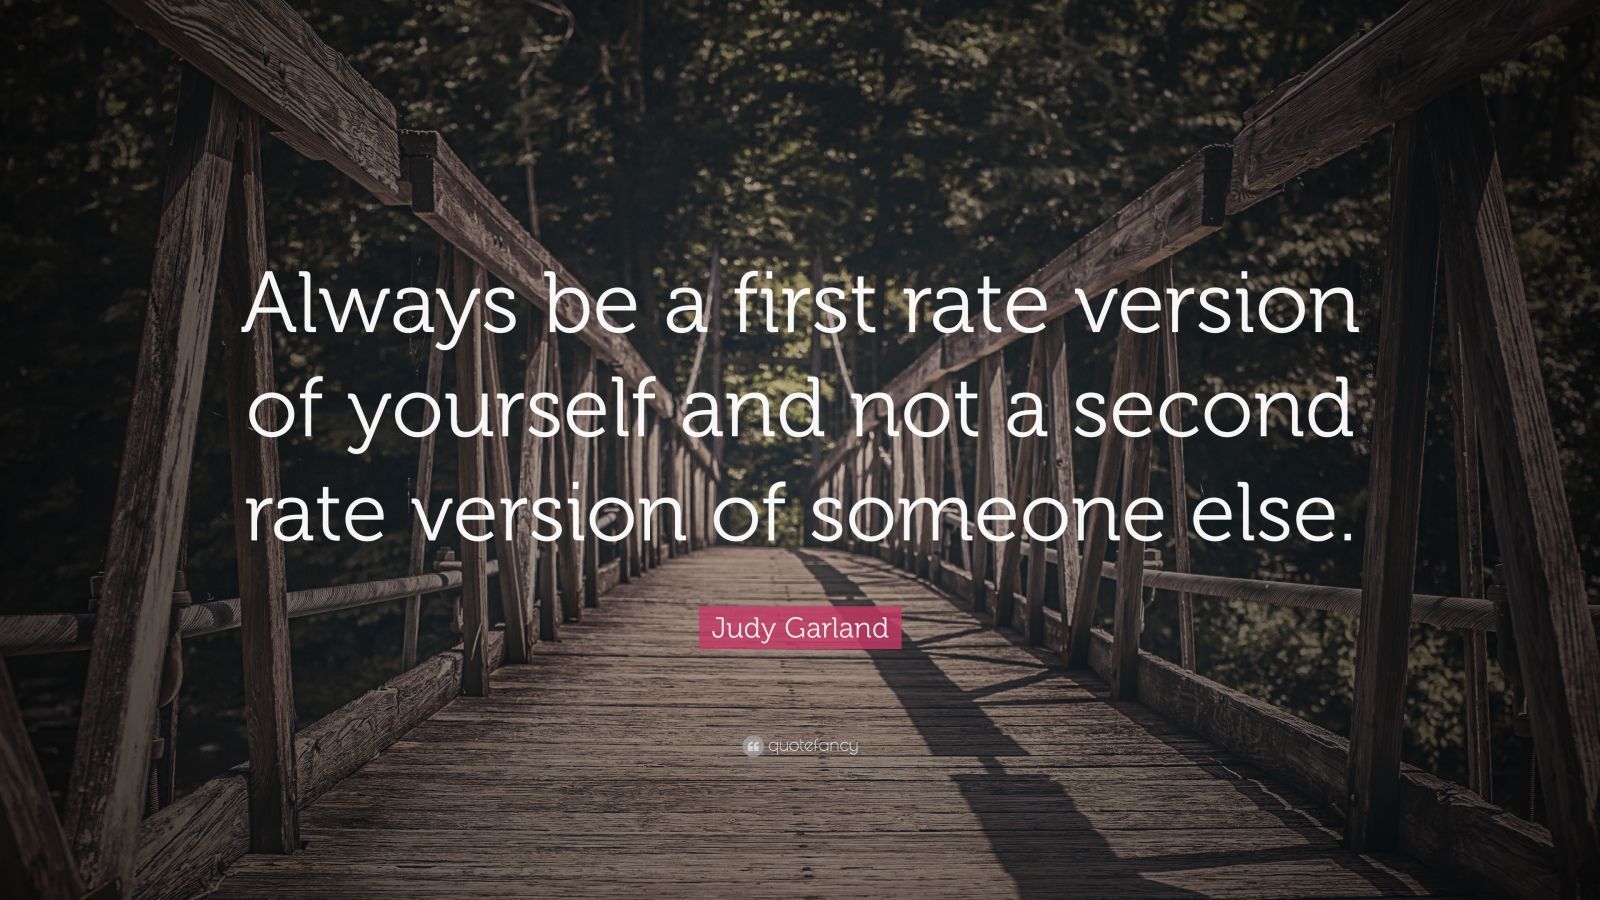 Judy Garland Quote “always Be A First Rate Version Of Yourself And Not A Second Rate Version Of